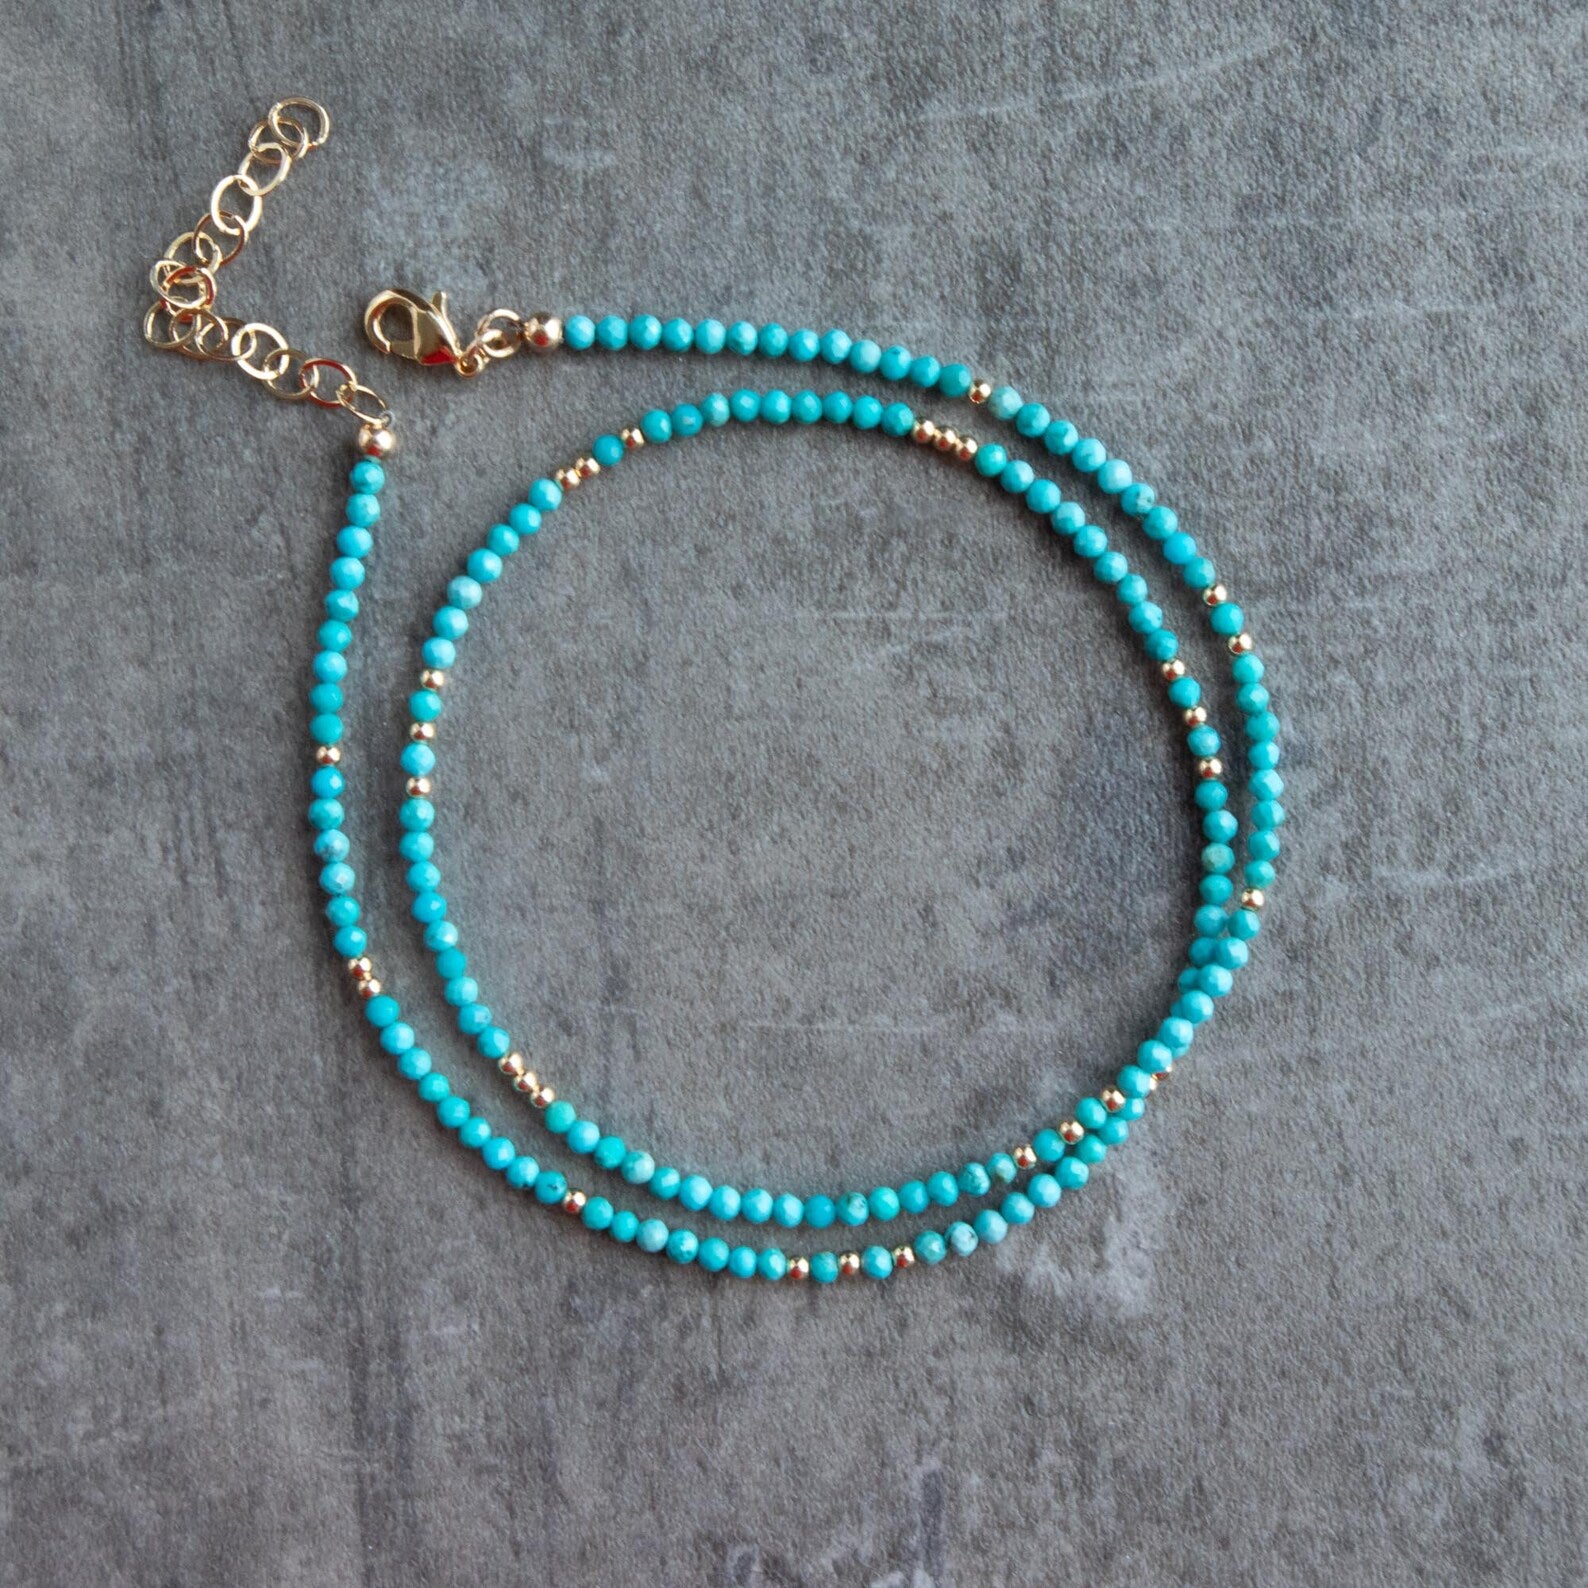 Turquoise Beads | Genuine Turquoise Loose Beads | The Curious Gem